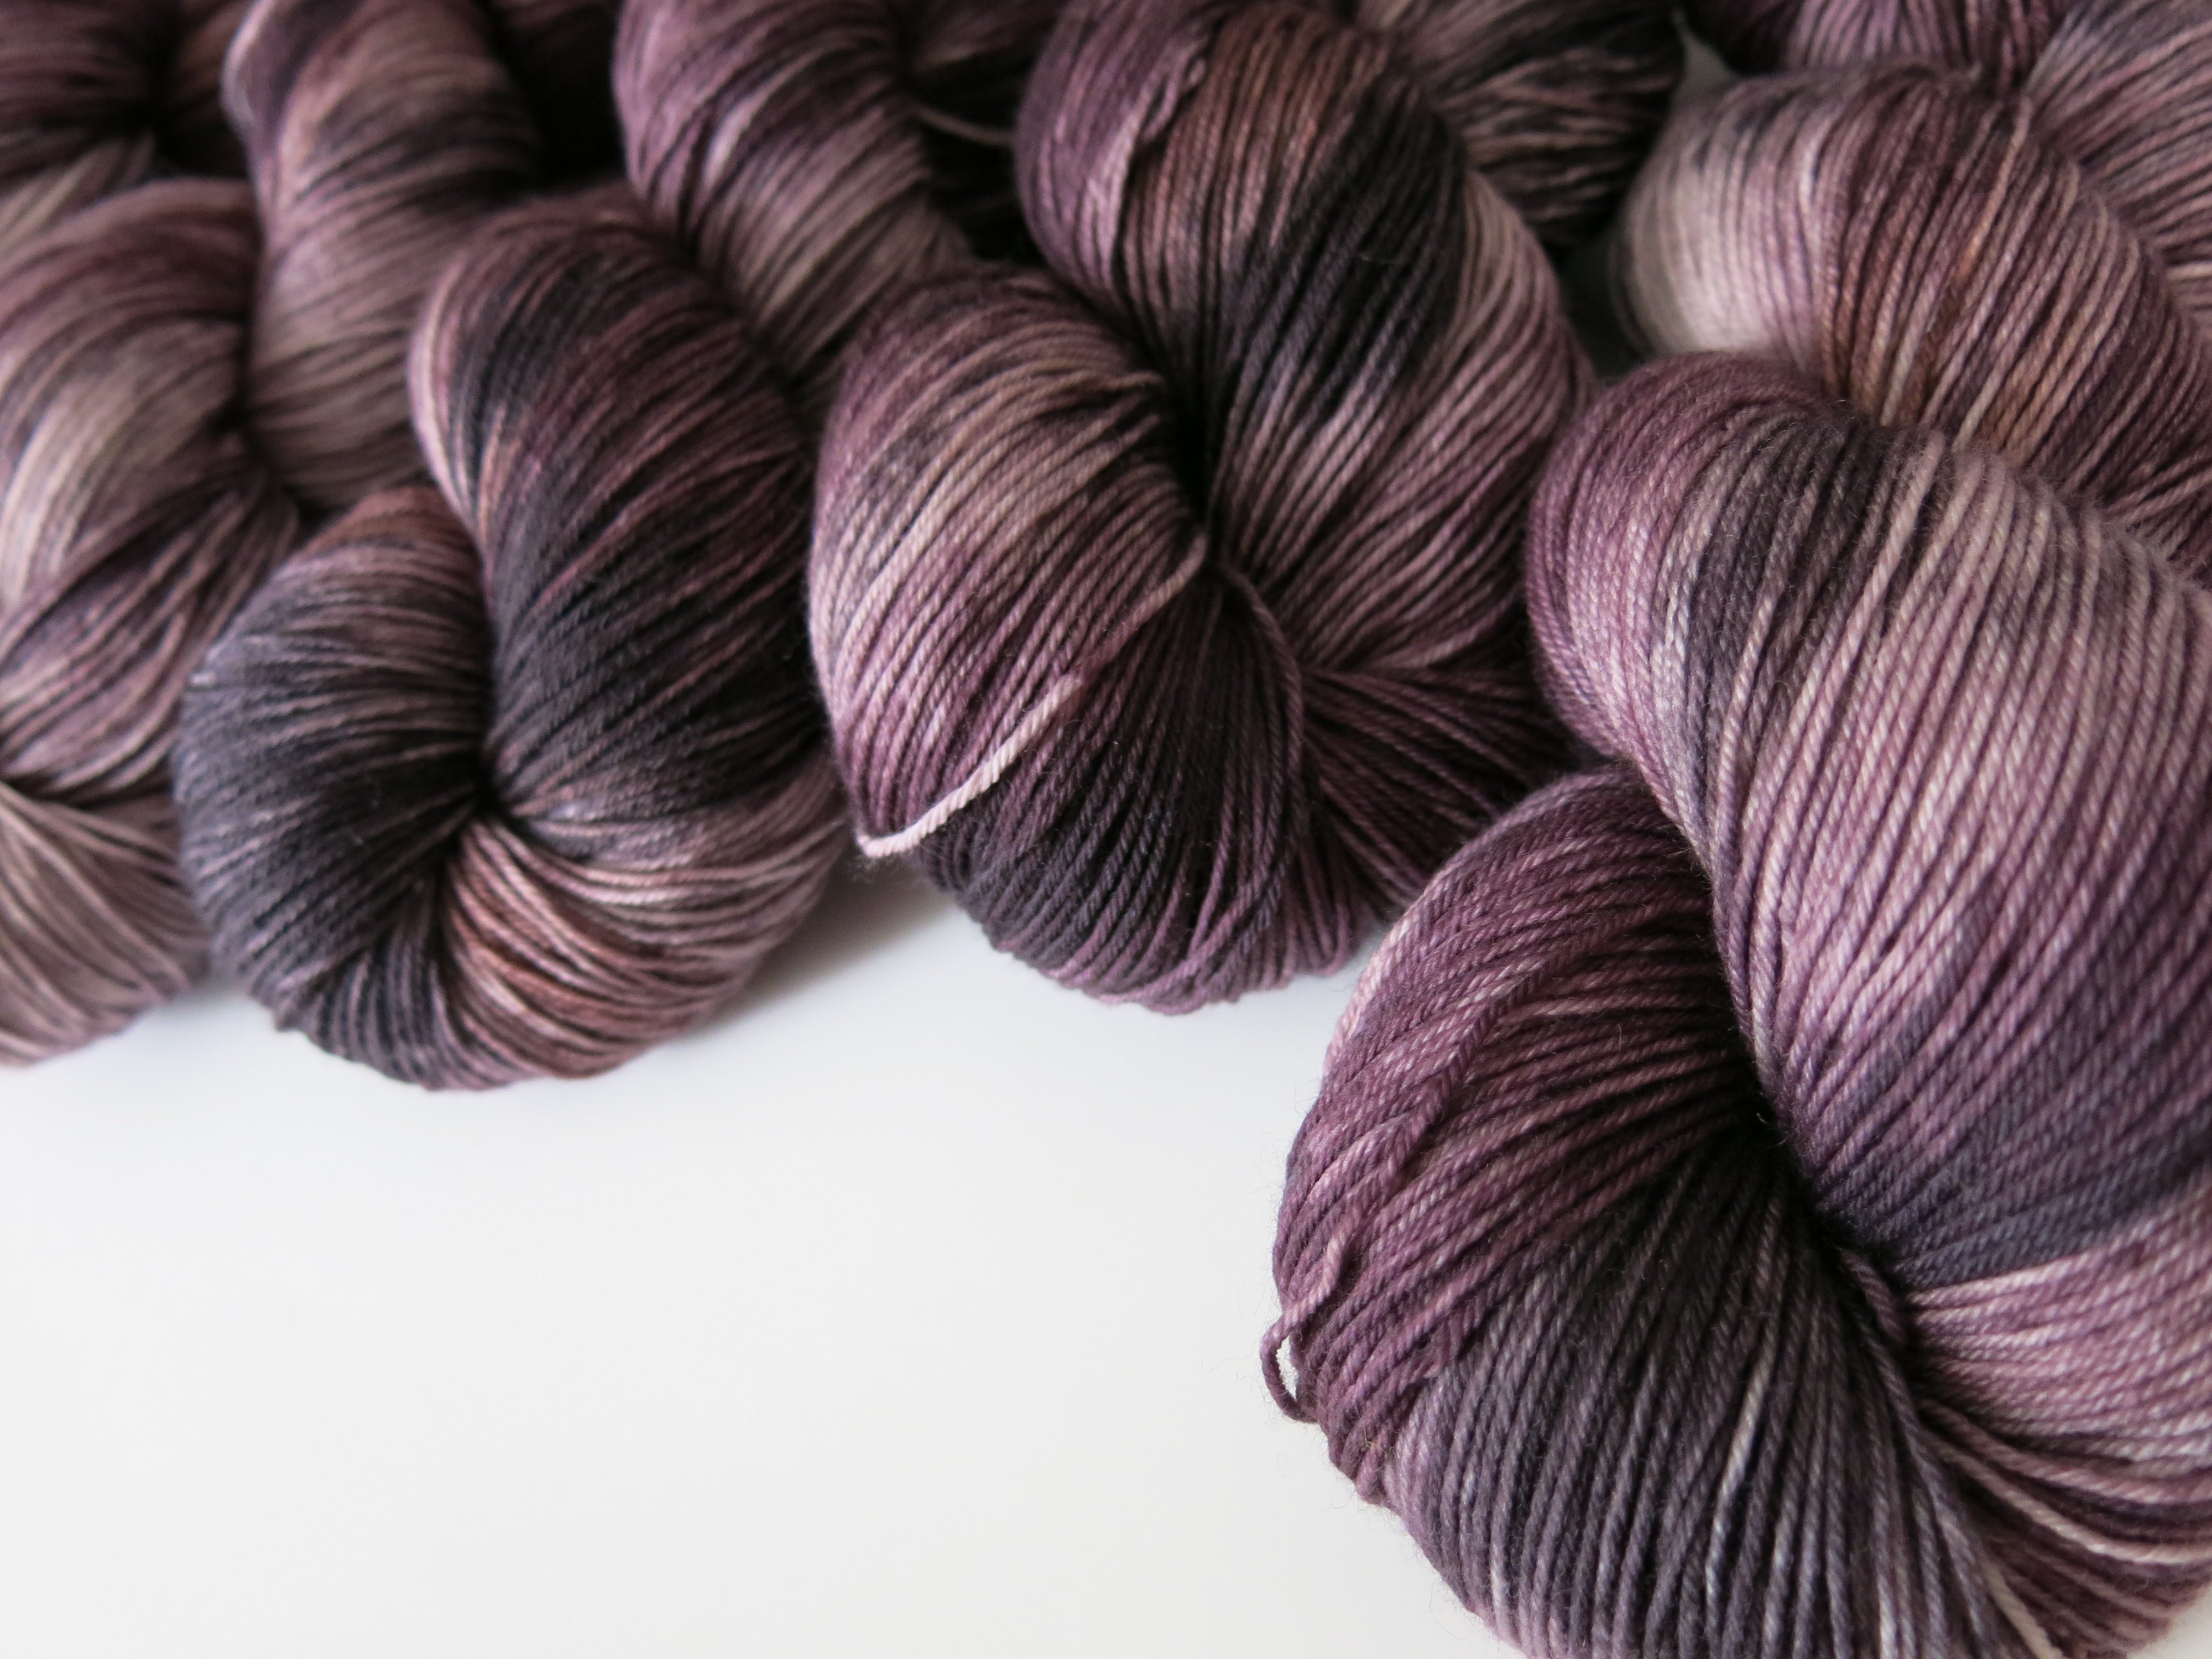 satyr kettle dyed dark brown sock yarn skeins for knitting and crochet